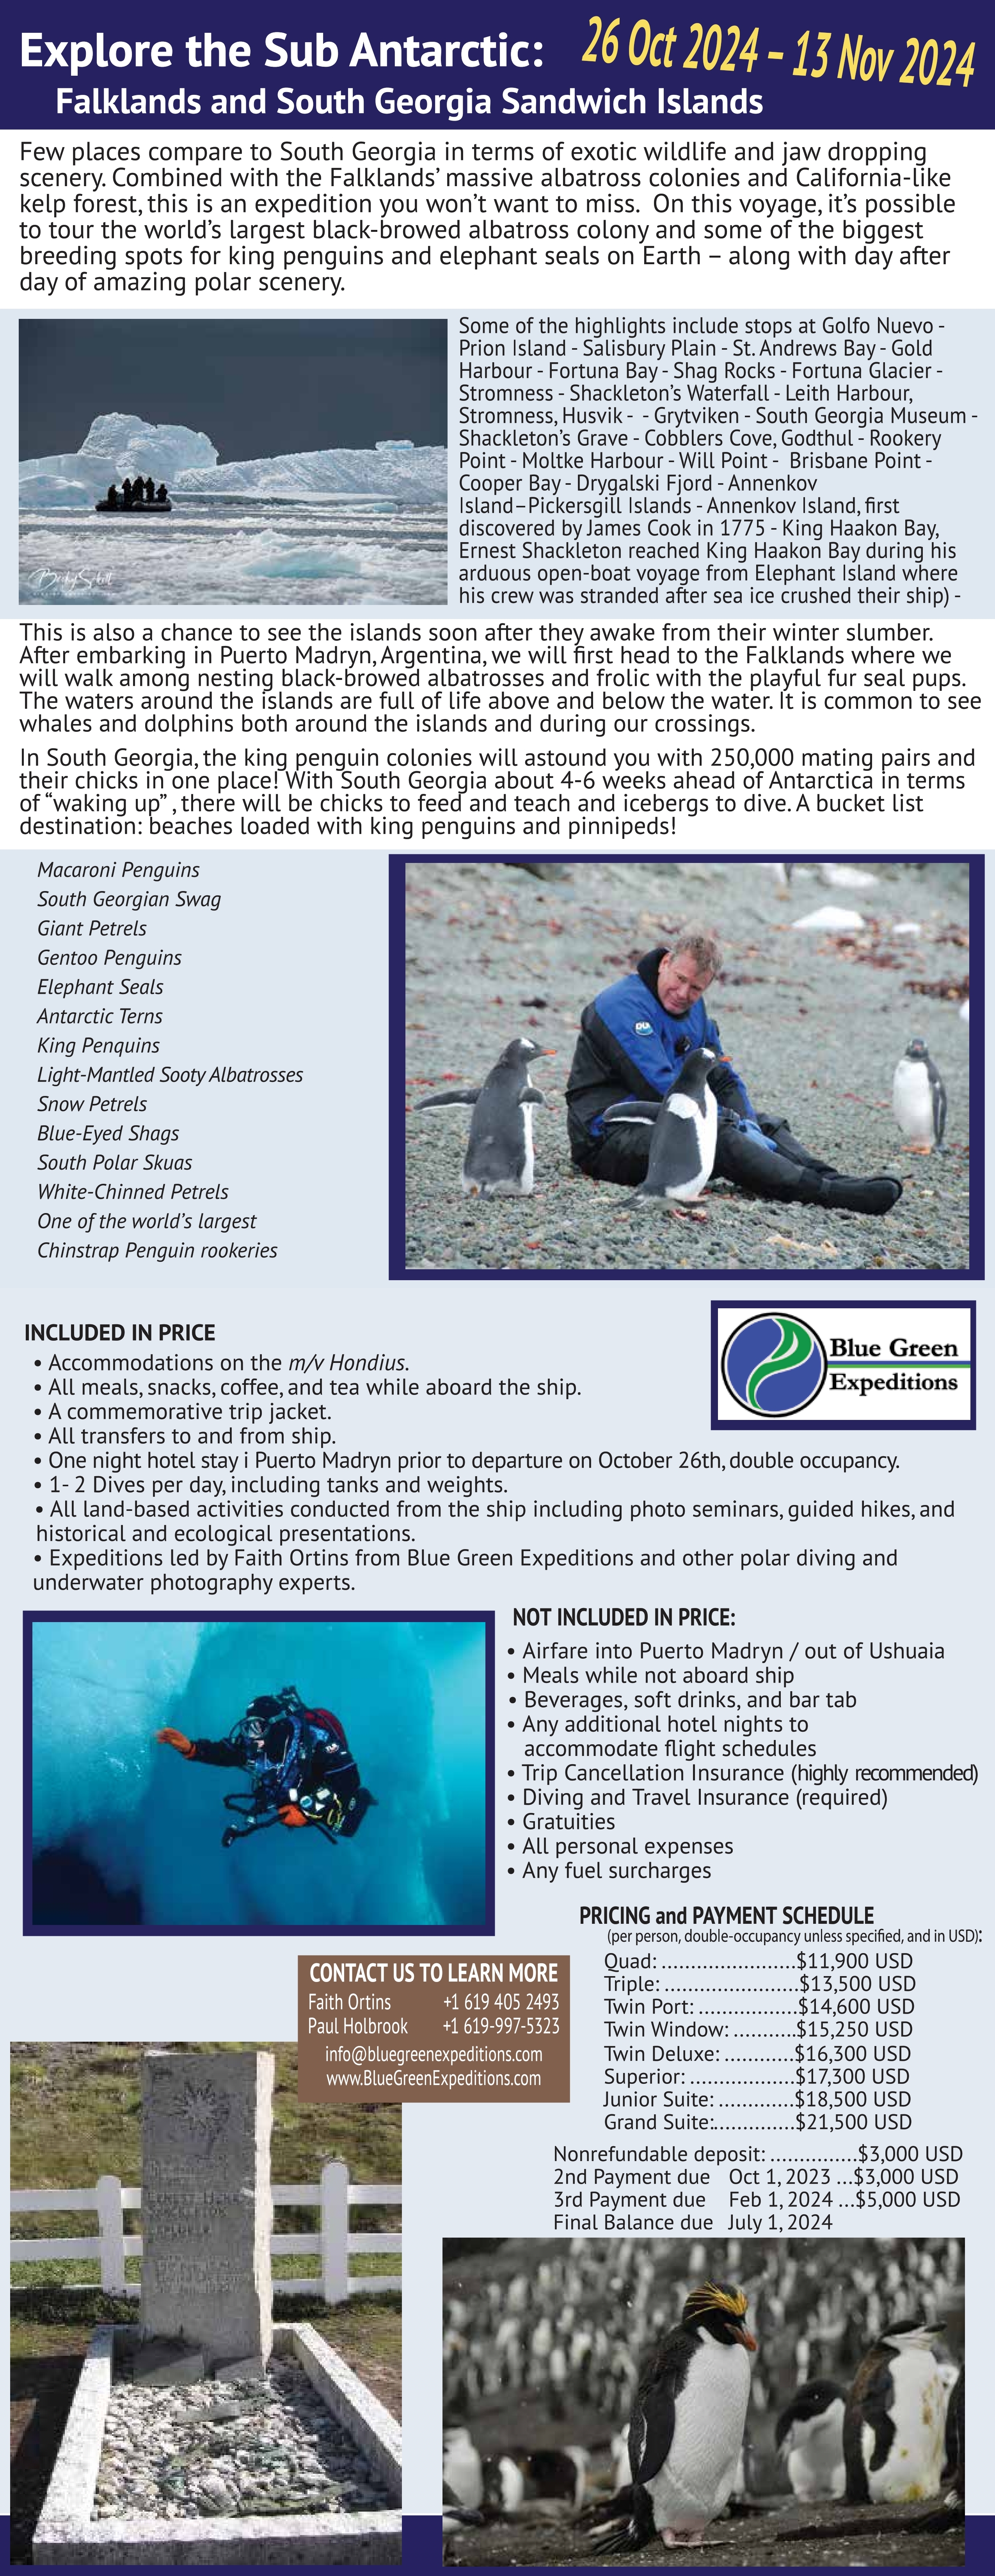 Falklands and SubAntarctic 2024 expedition - October 26, 2024 - November 13, 2024, cost and trip details. PDF flyer contains the same information.